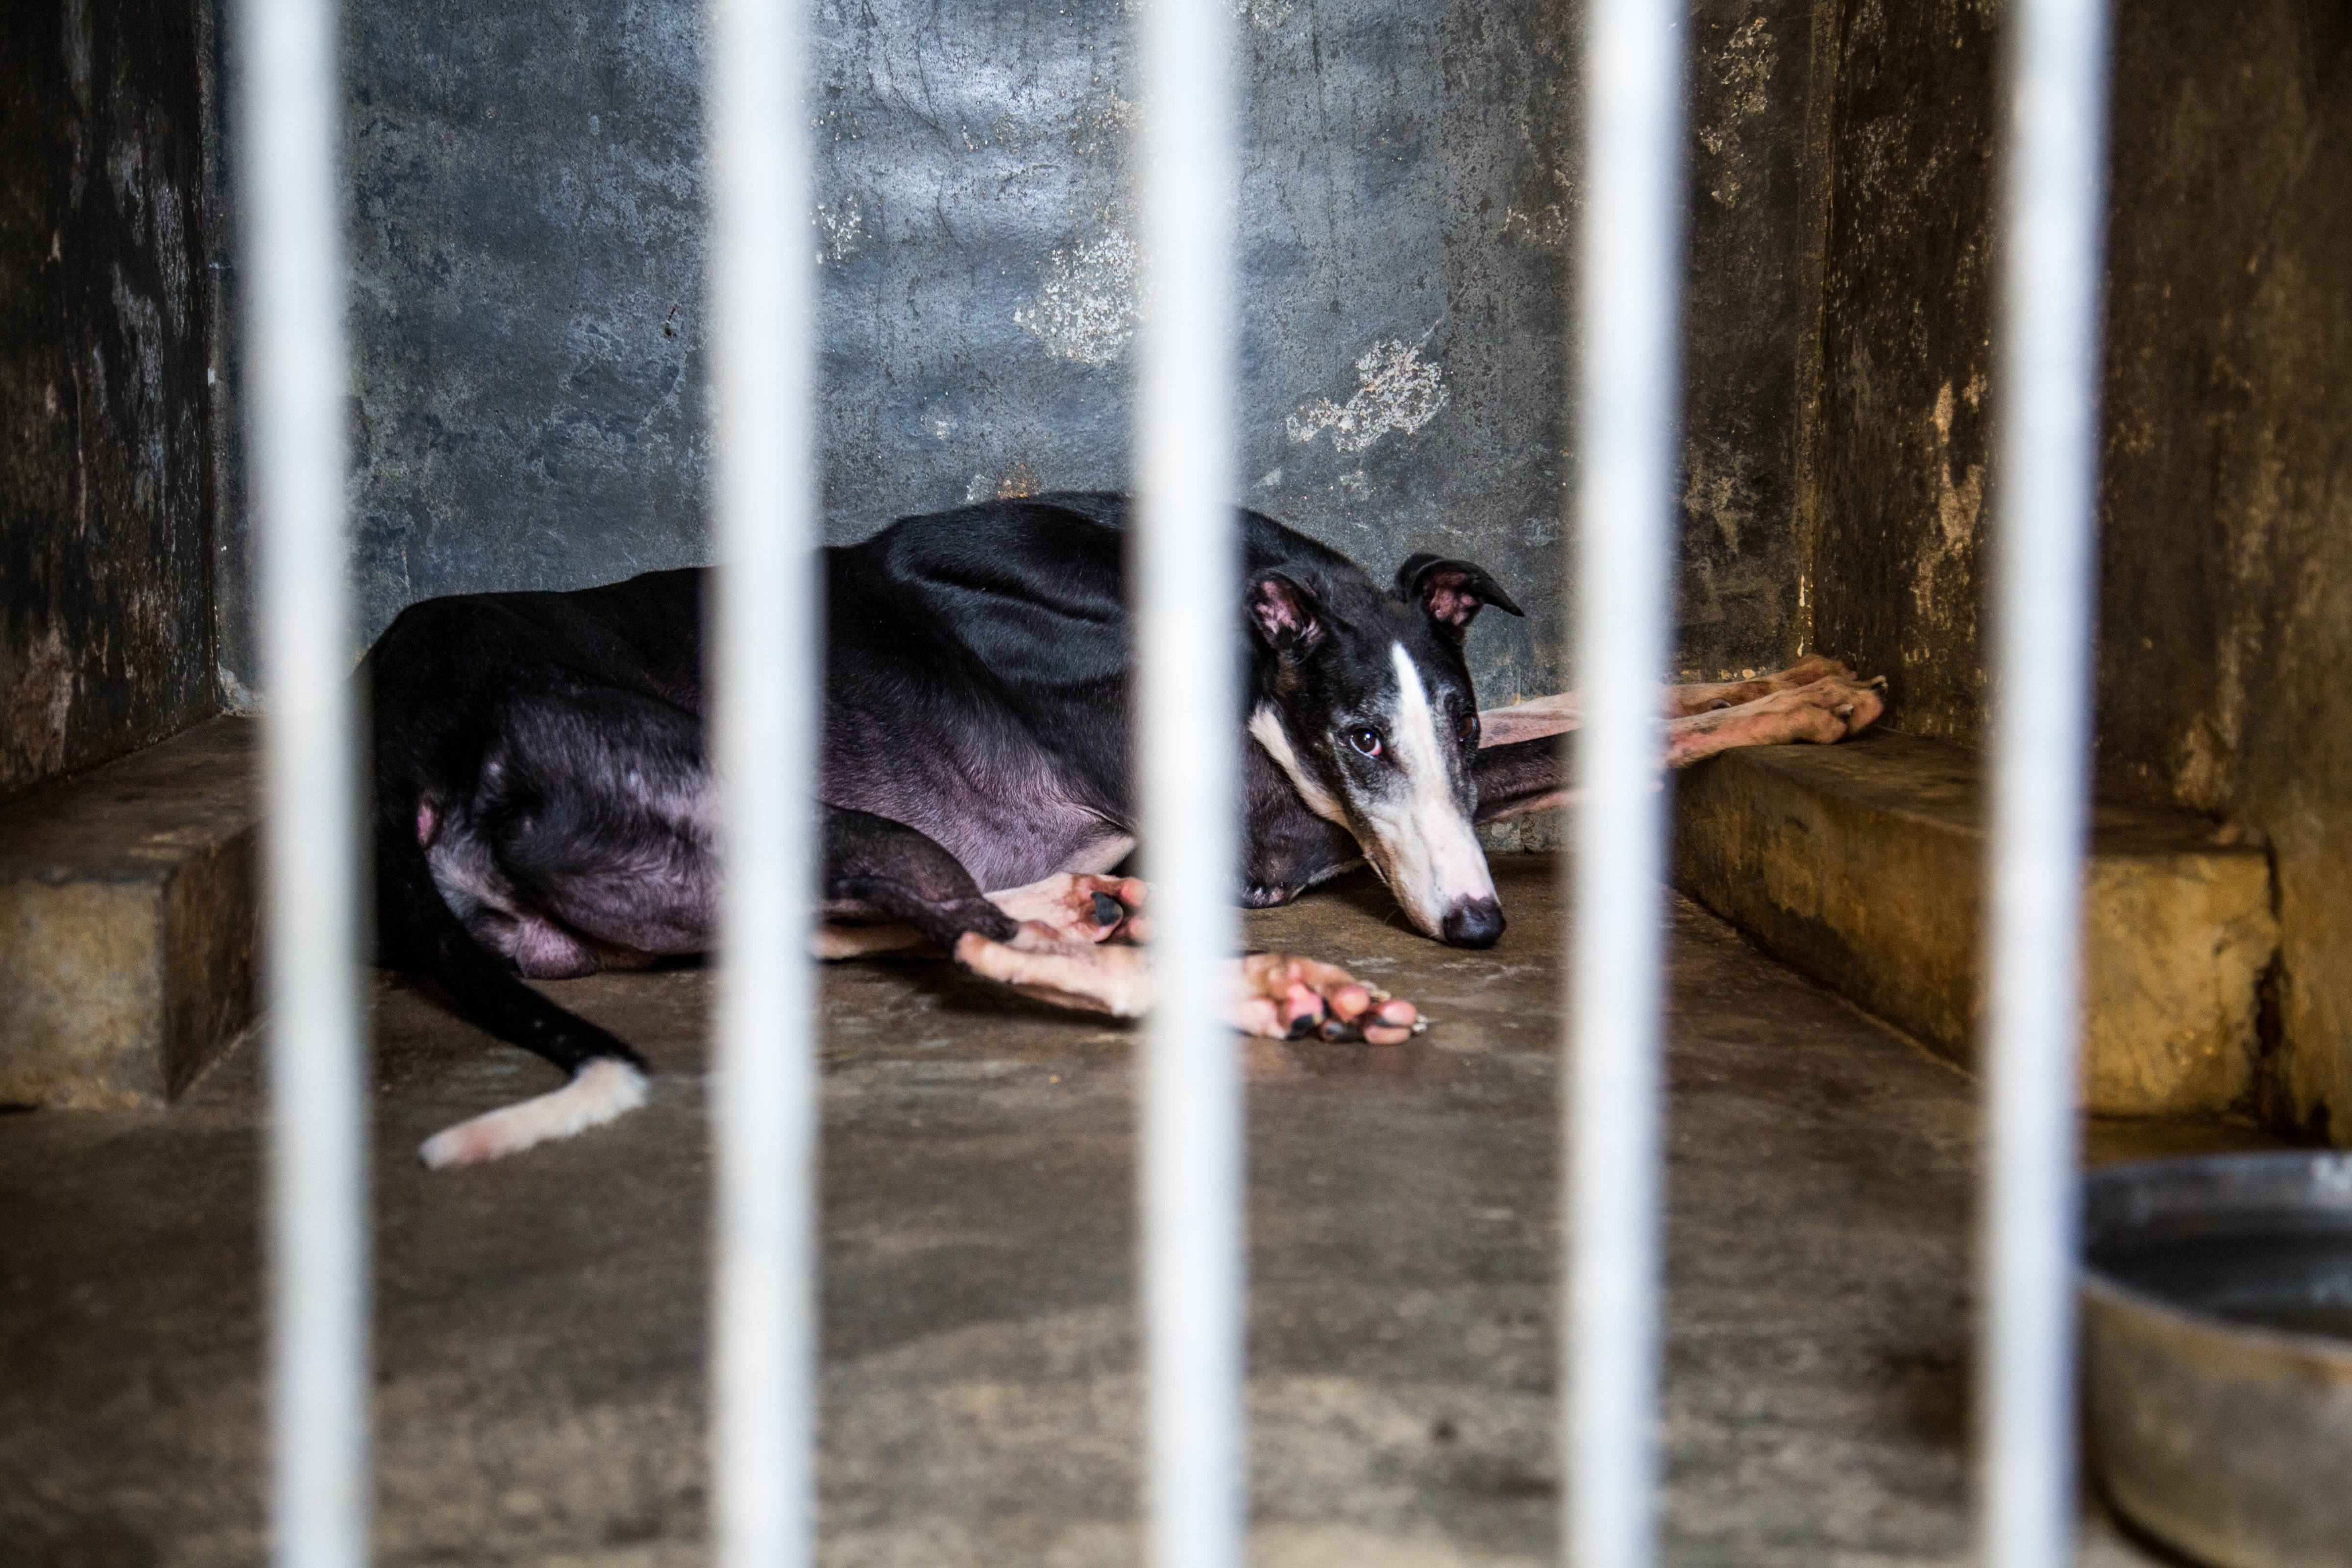 A greyhound kept in Canidrome's kennels in Macau on July 26, 2018. (Aria Chen—TIME)